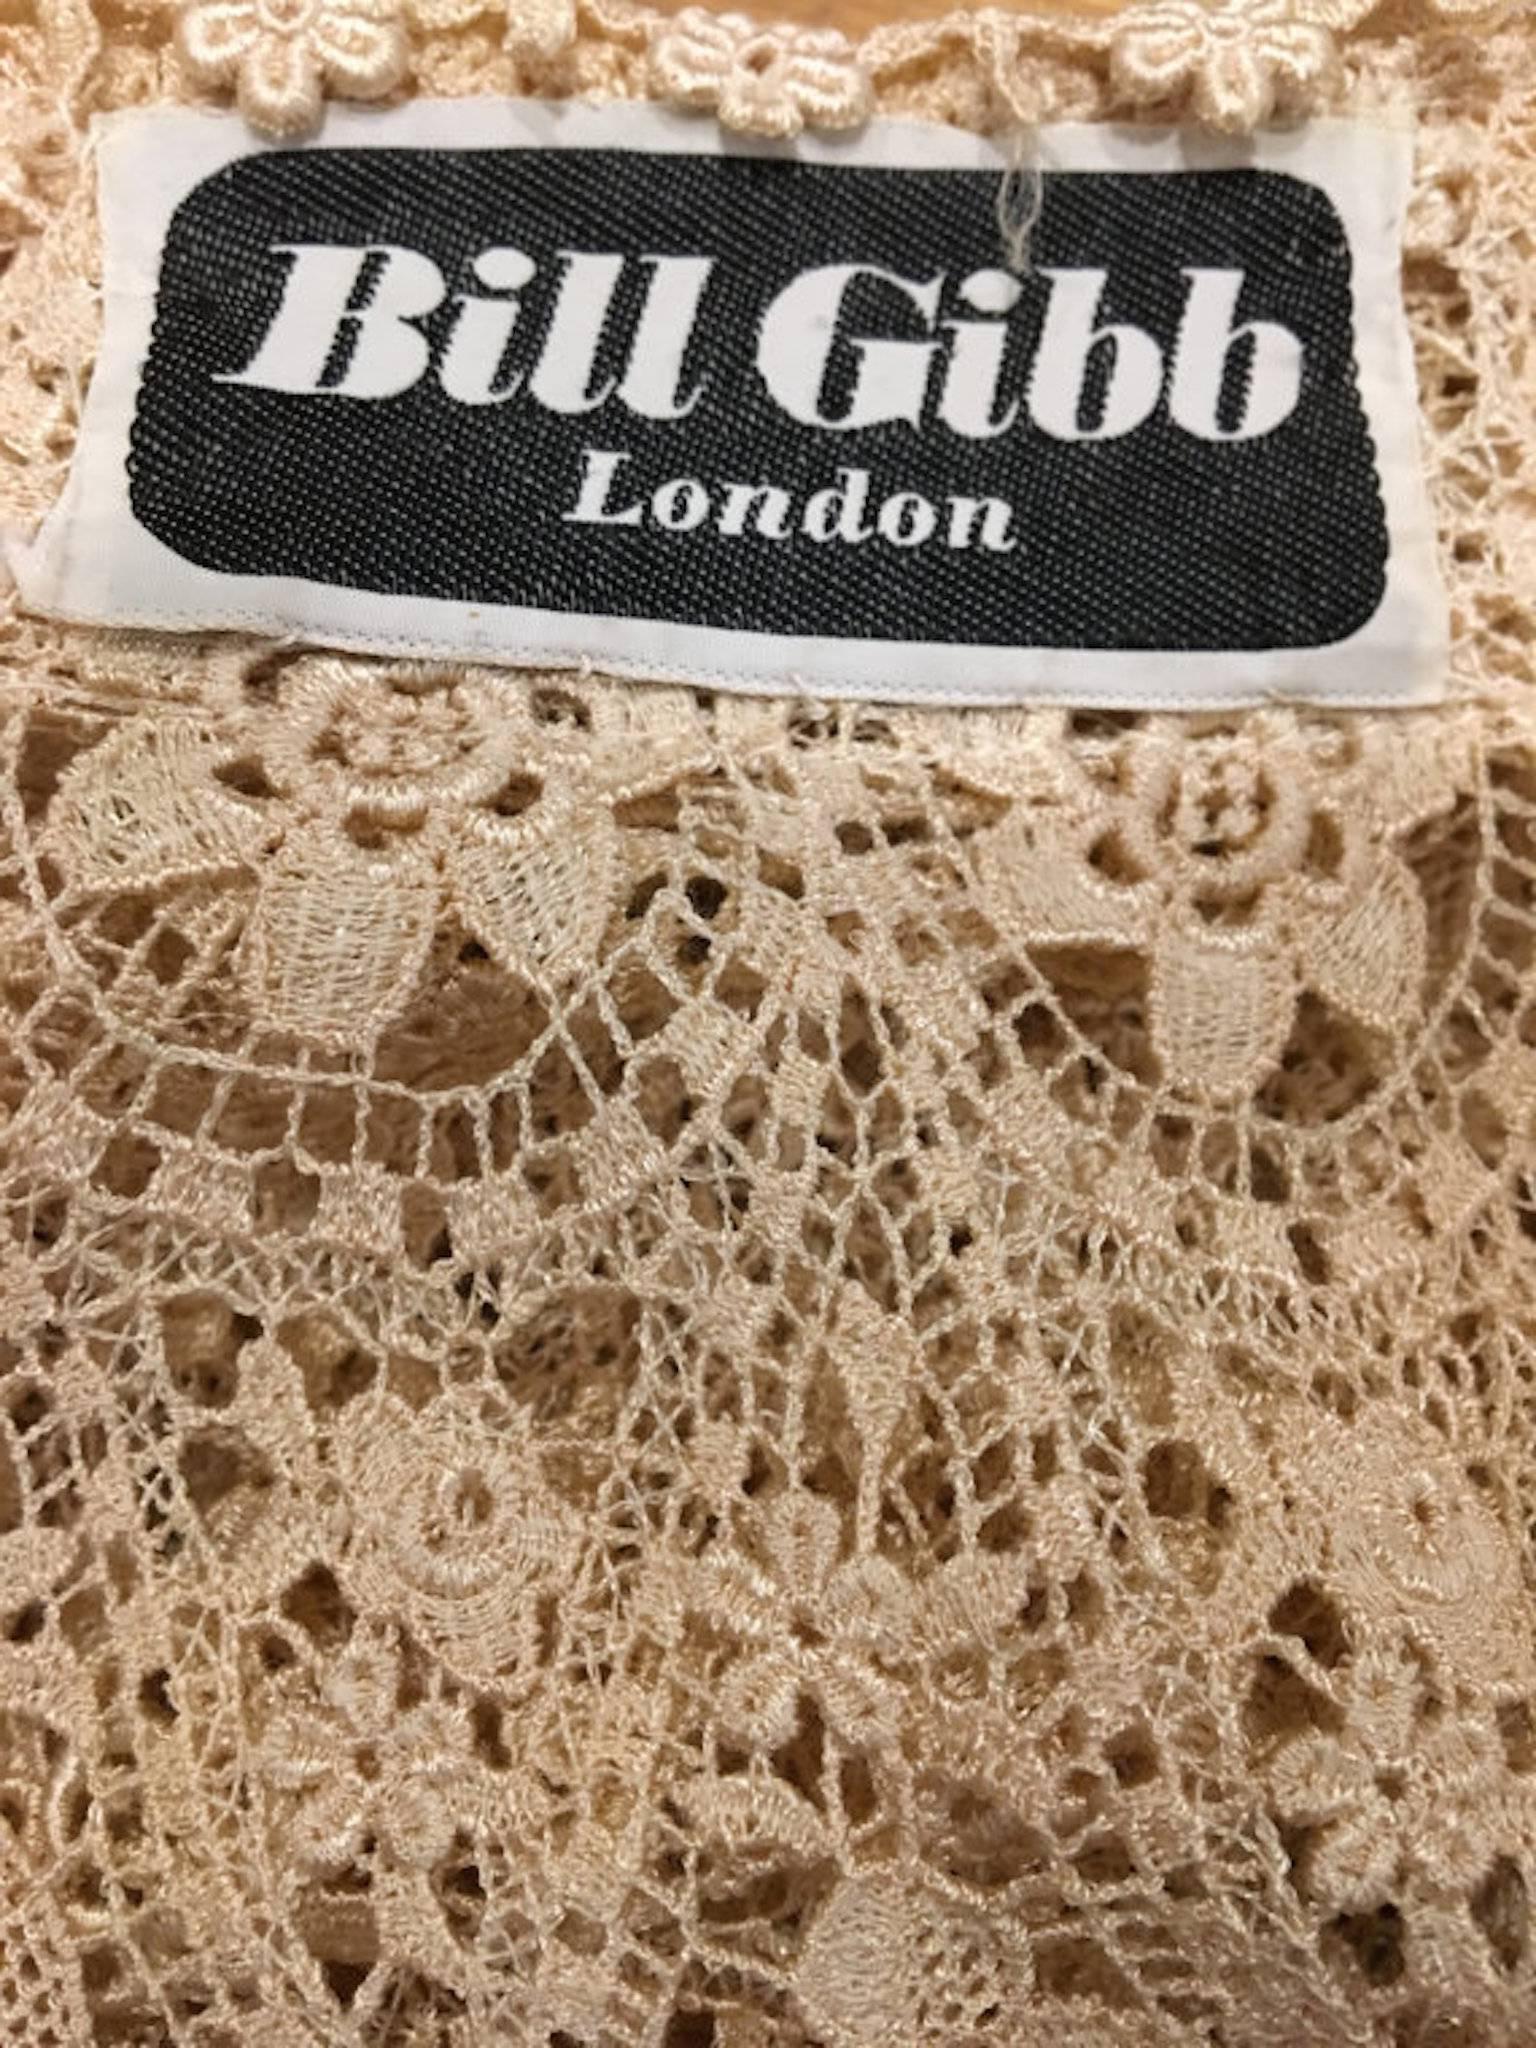 Bill Gibb 1970s Vintage Ecru Floral Scalloped Lace Jacket 8 10 UK In Excellent Condition For Sale In Portsmouth, Hampshire